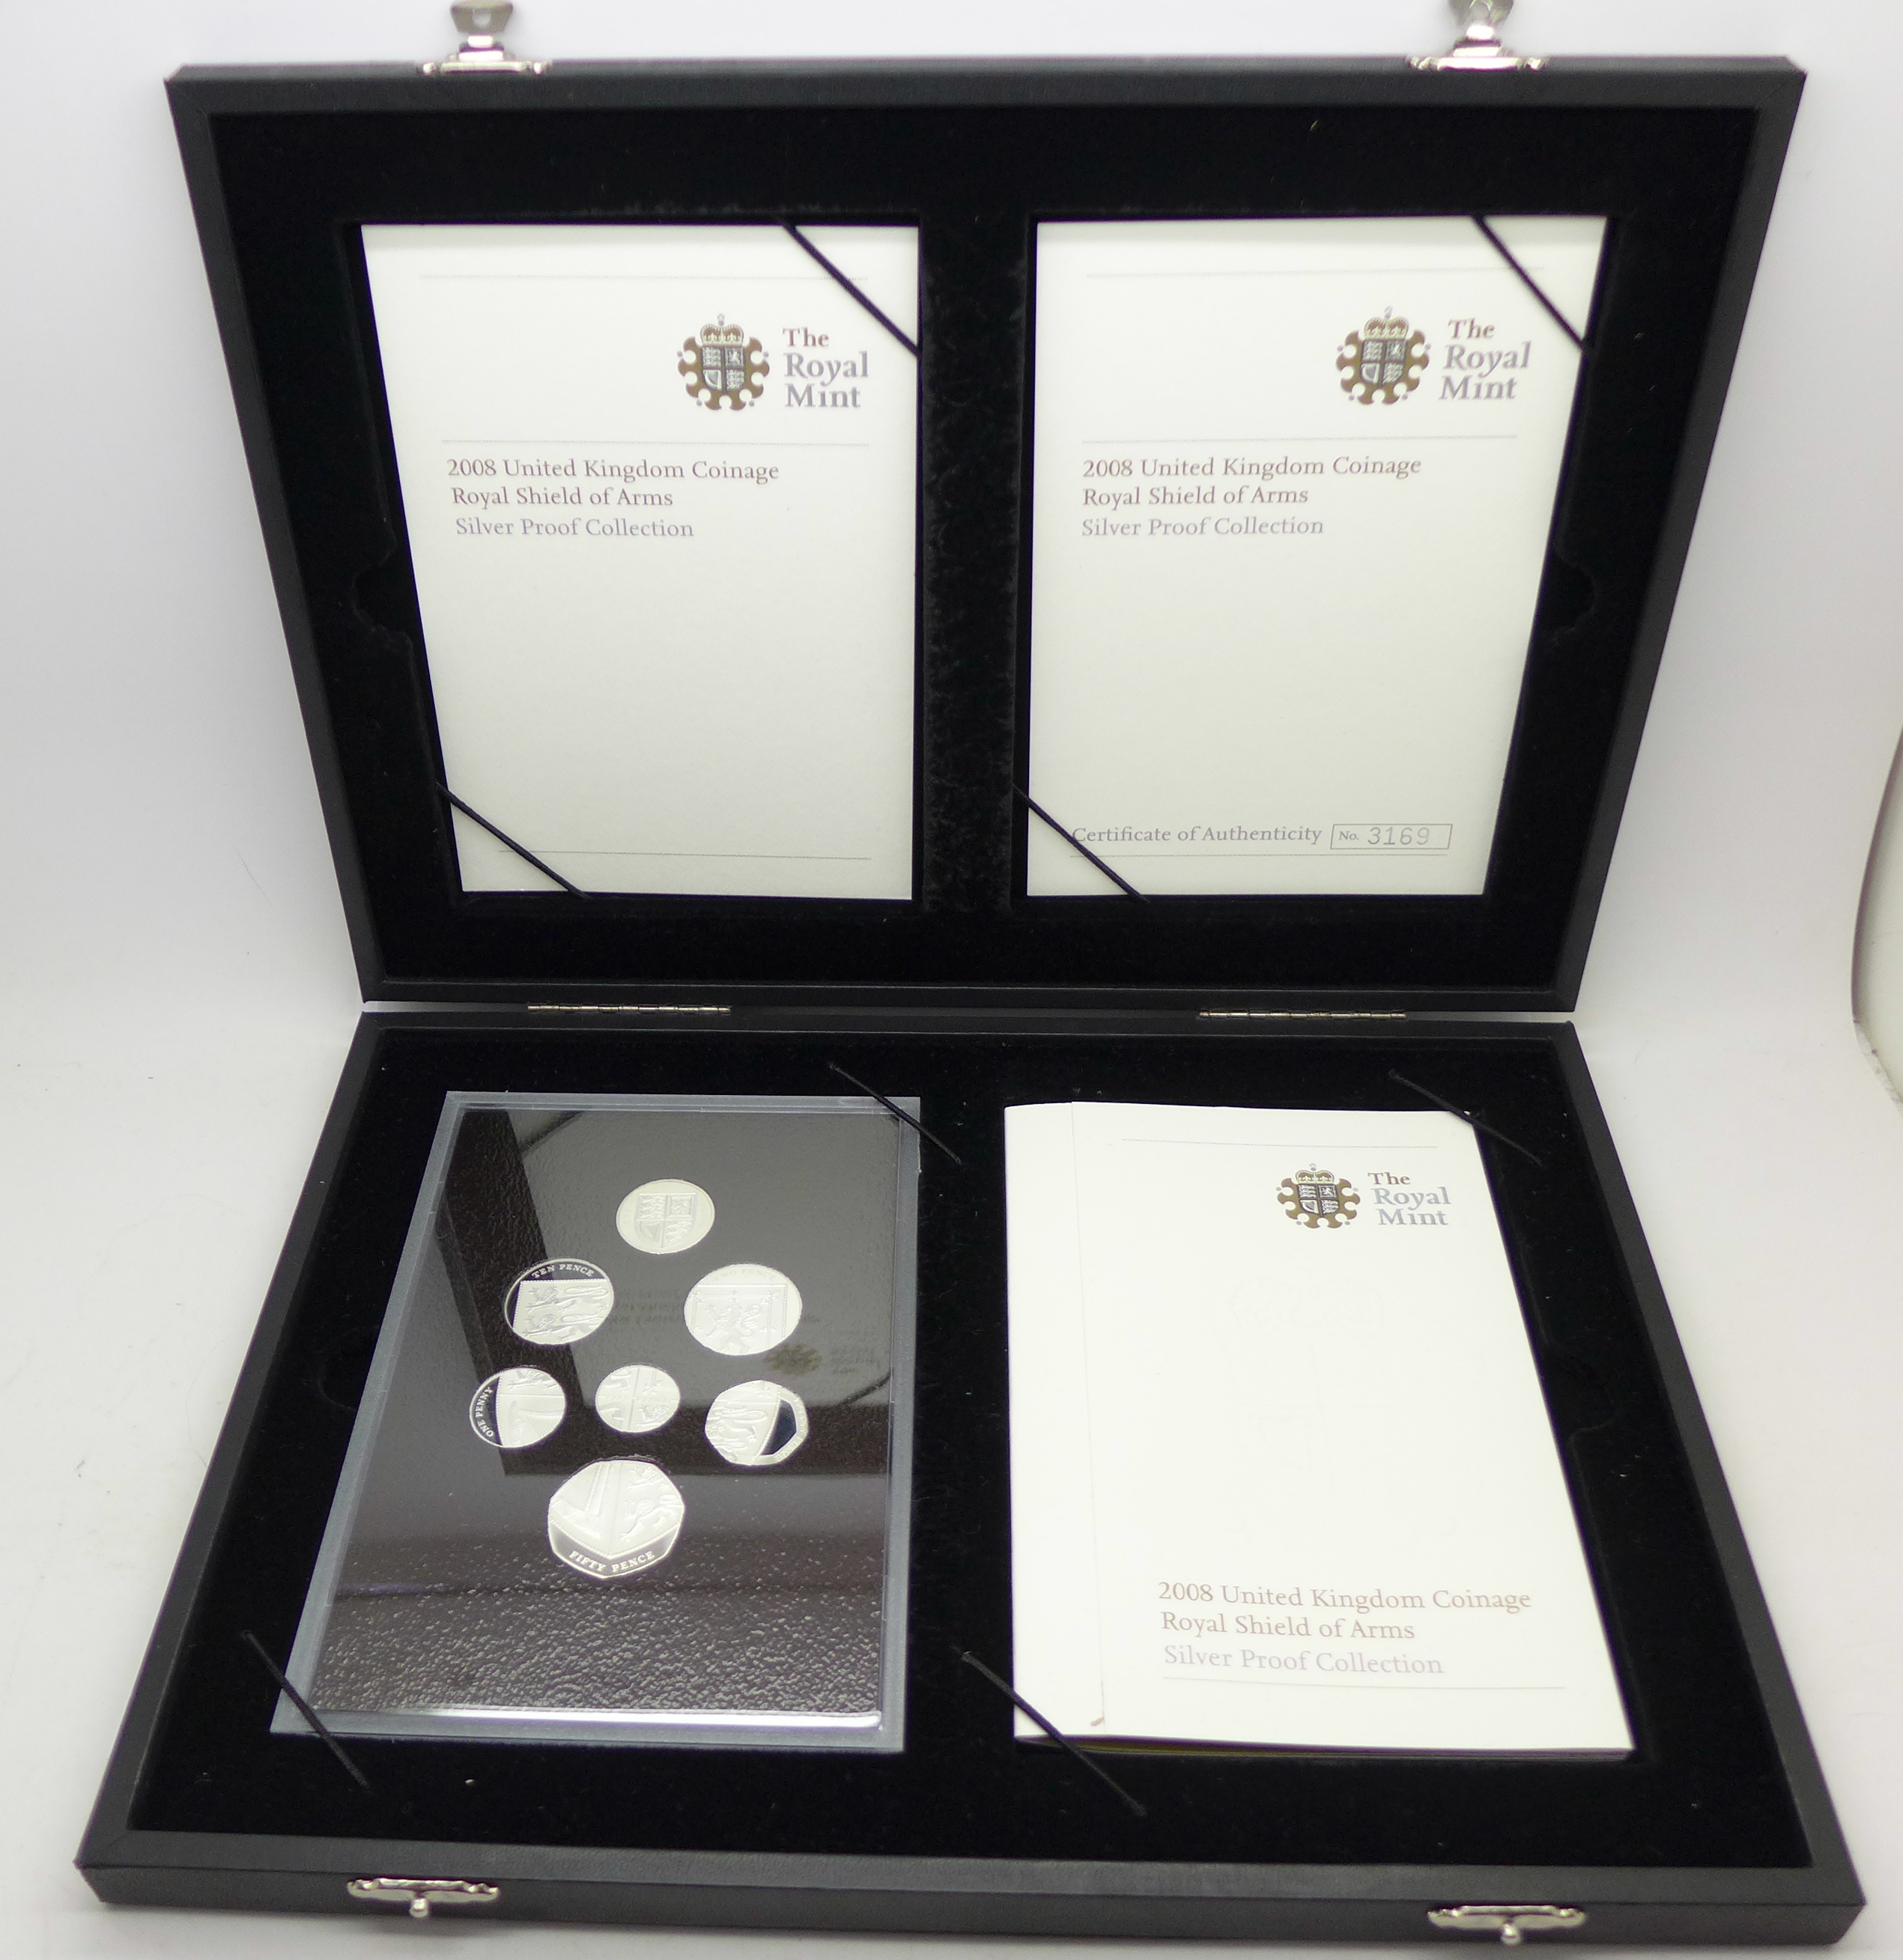 The Royal Mint 2008 United Kingdom Coinage Royal Shield of Arms Silver Proof Collection,